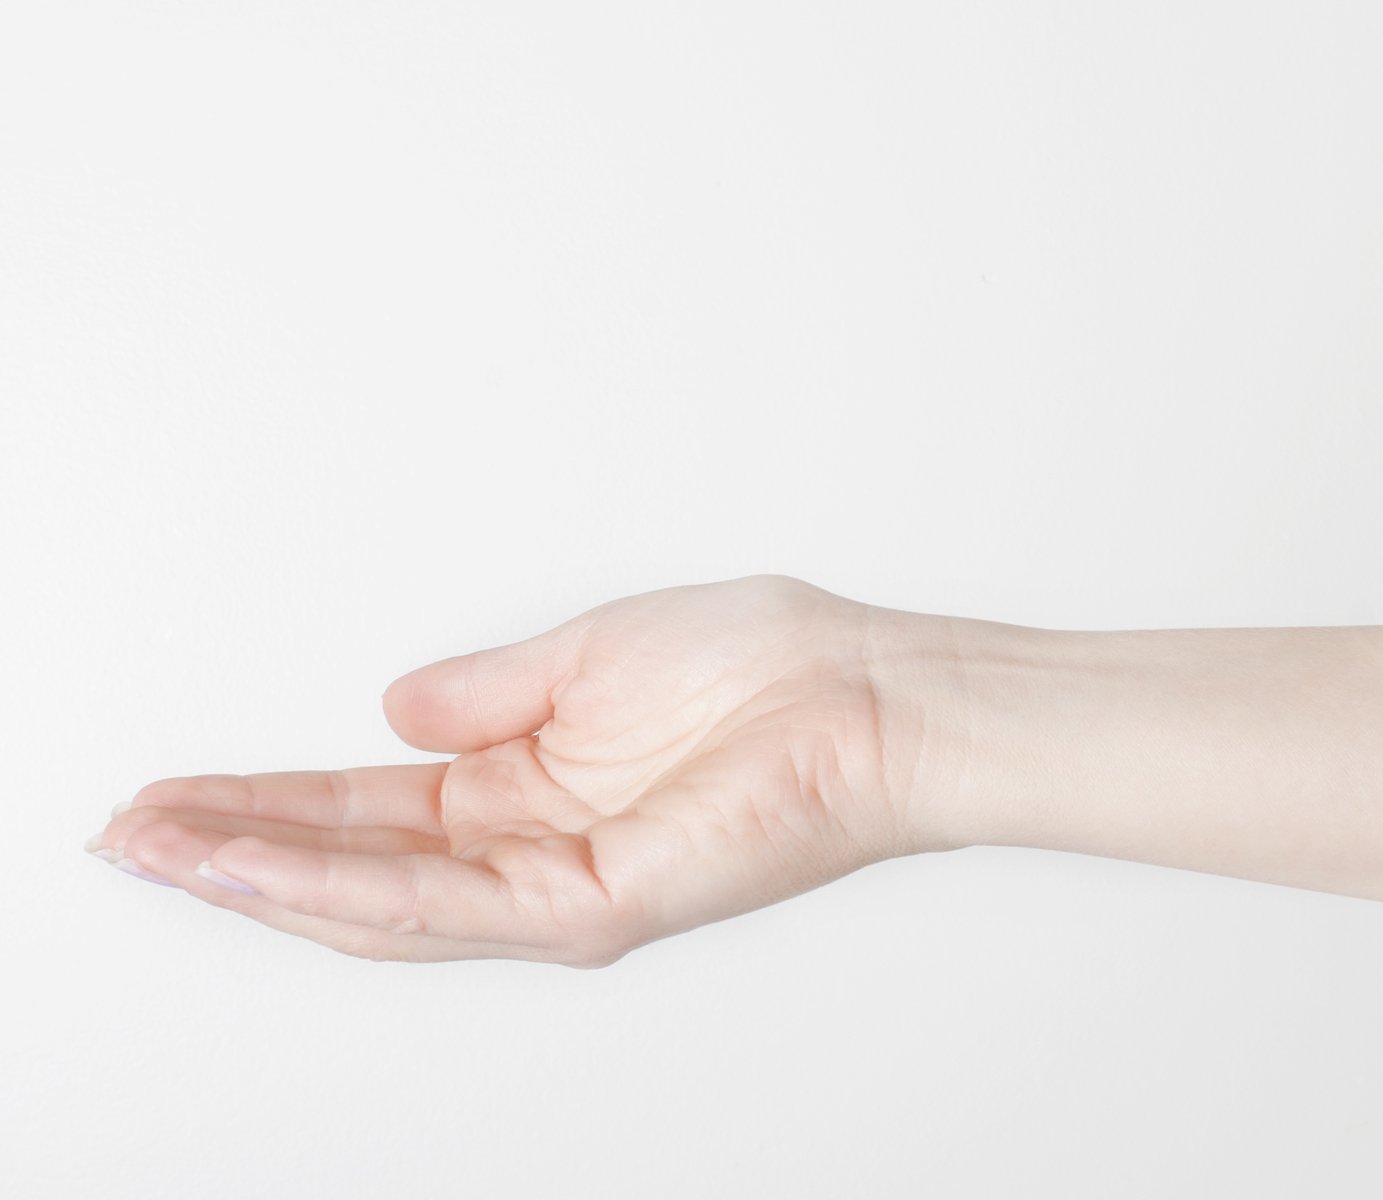 hand holding soing on white surface with white background